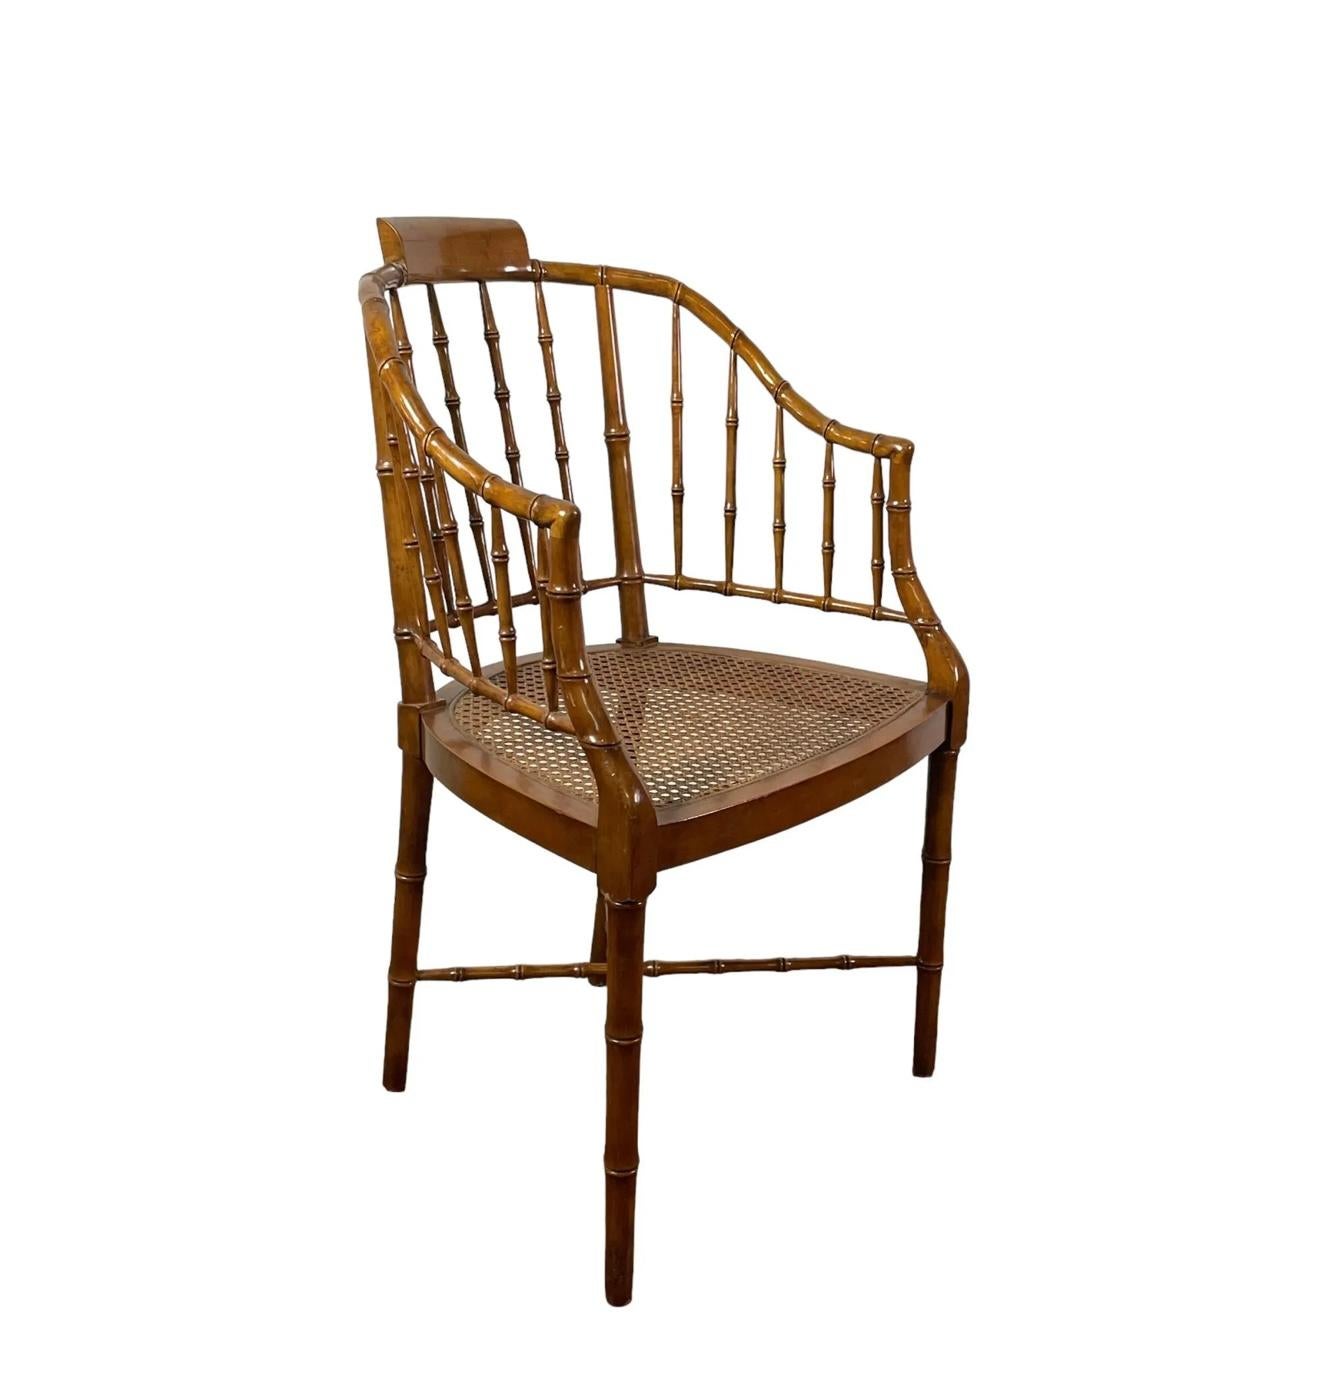 A pair of Windsor style faux bamboo and rattan chairs. Each chair has a tub shaped back with curved arms, a caned seat and an x-form cross stretcher. Chairs have Baker Furniture Company plaque.